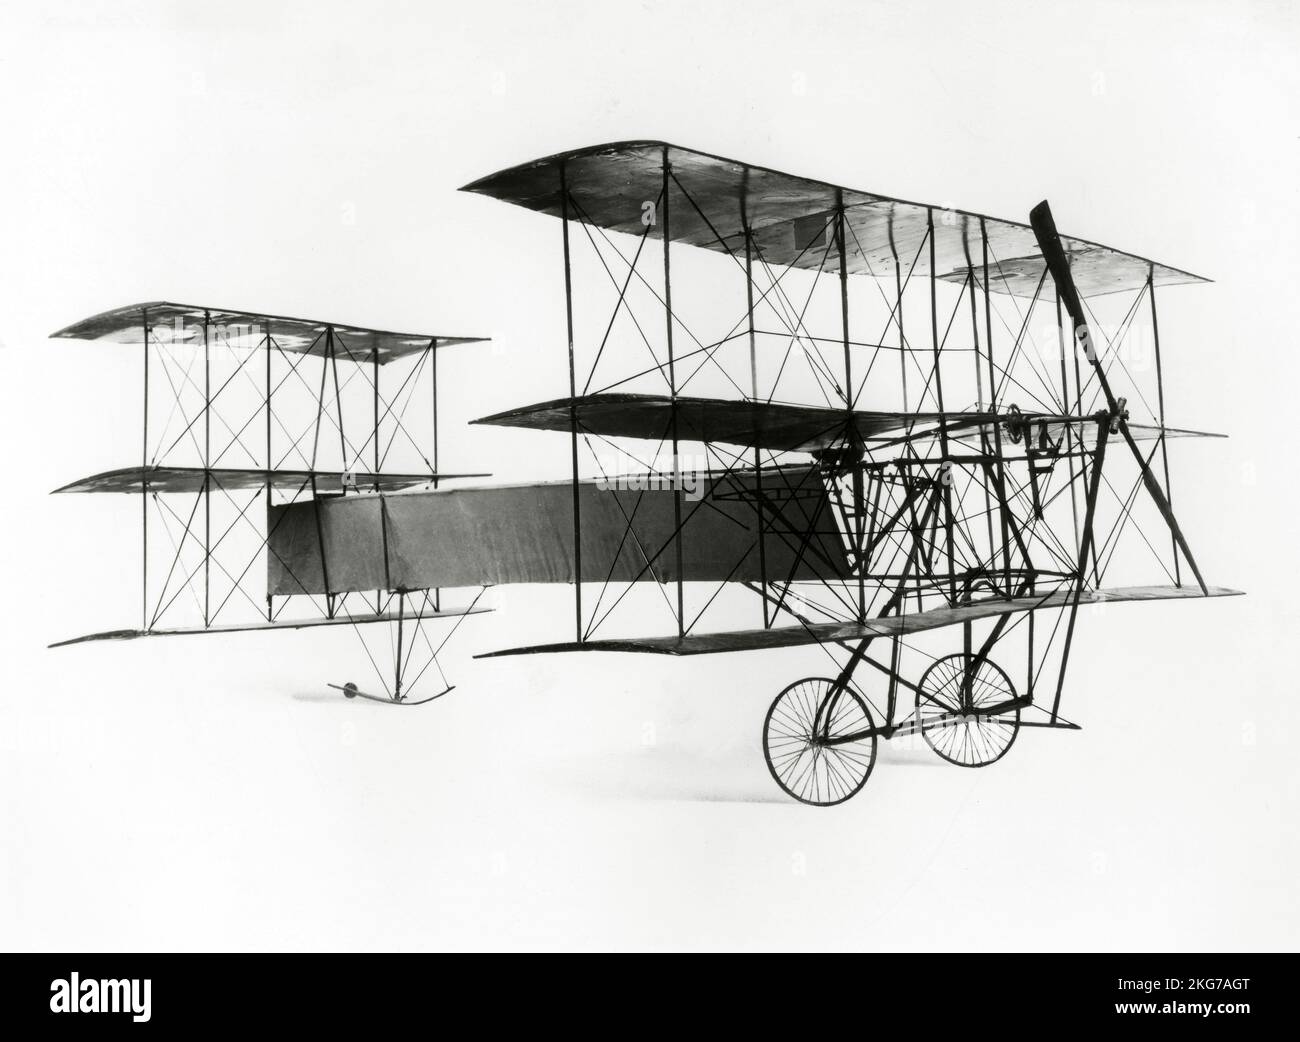 The British experimental aircraft Roe I Triplane, built by Alliott Verdon-Roe in 1909. Stock Photo